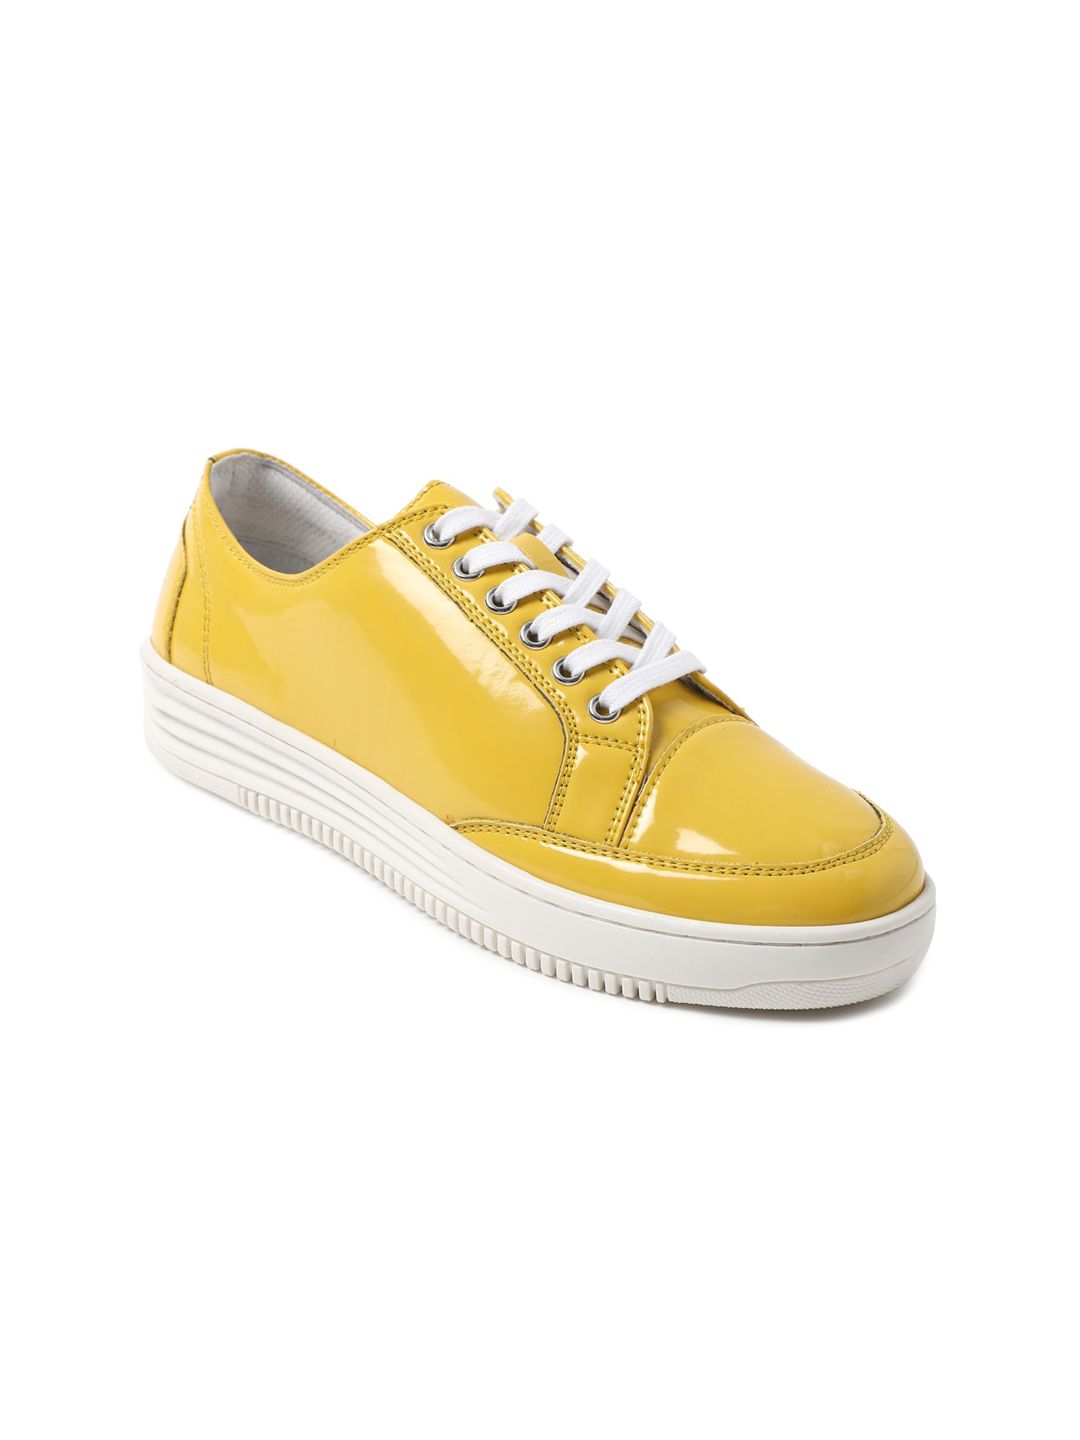 FOREVER 21 Women Yellow Solid PU Sneakers Price in India